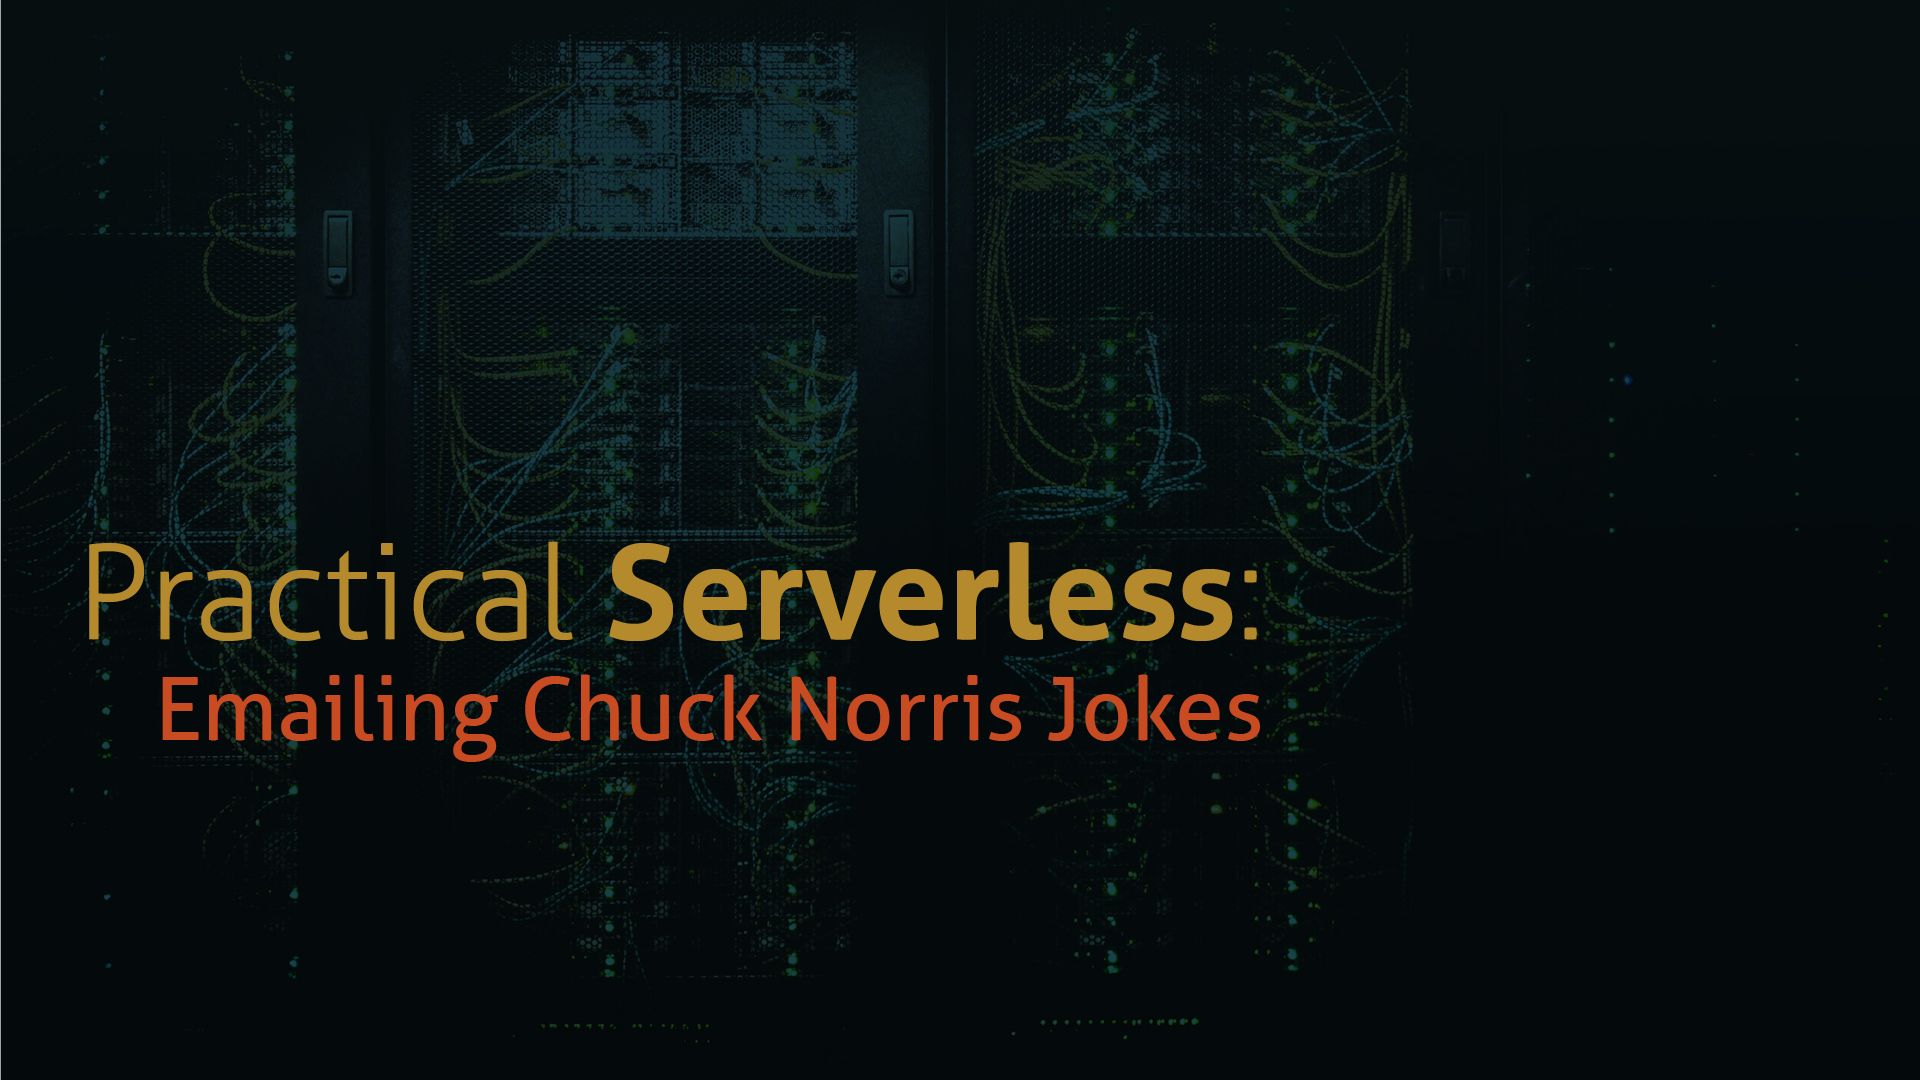 Practical Serverless: How to Email Yourself Chuck Norris Jokes